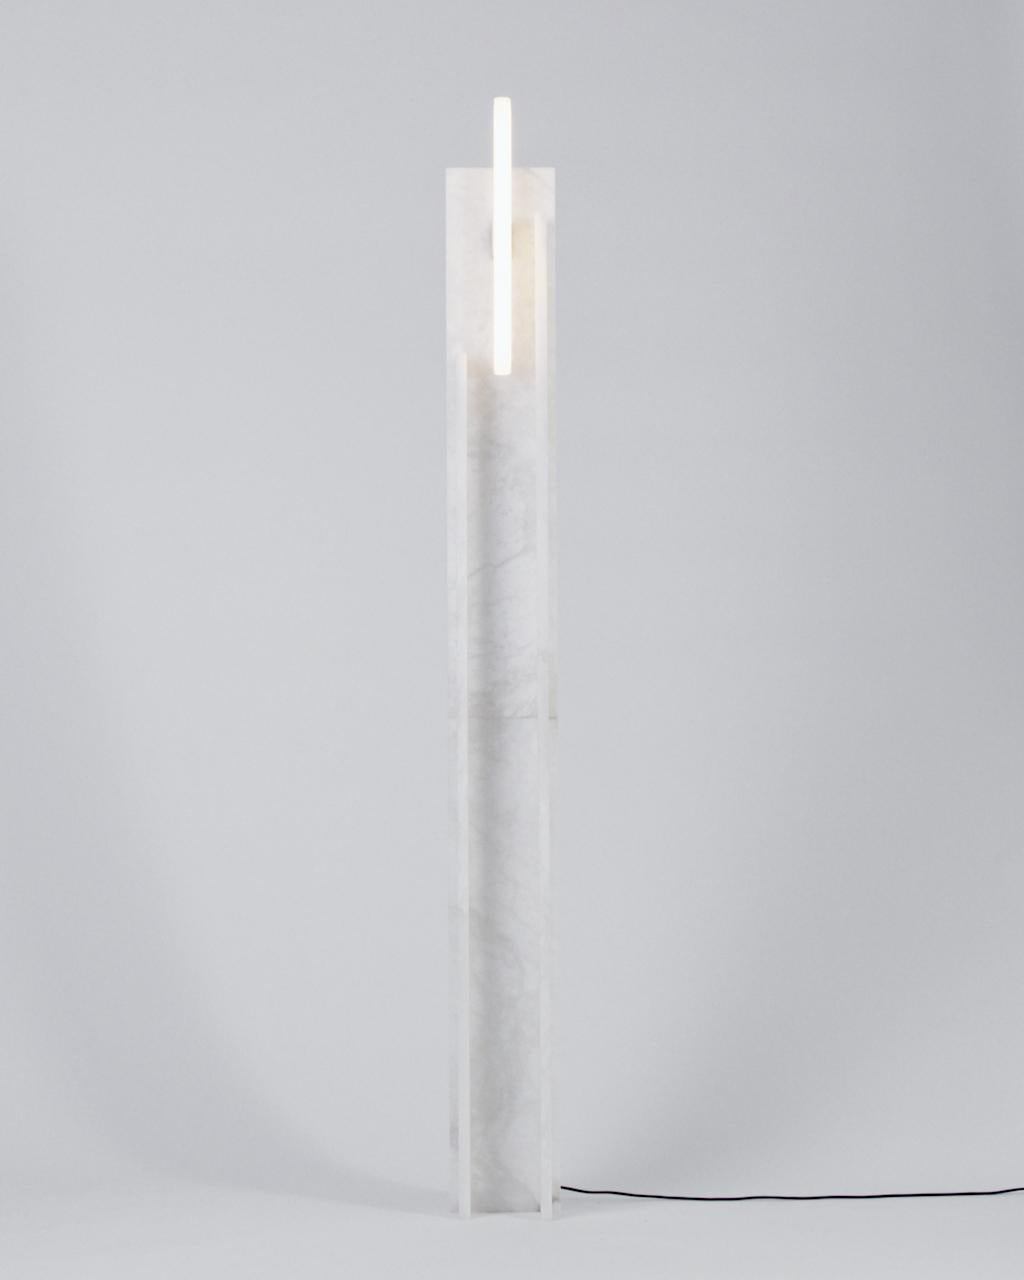 Alabaster tall lamp by Owl
Dimensions: D 20 x W 20 x H 190cm
Materials: Solid Alabaster.
Also available in different dimensions.

All our lamps can be wired according to each country. If sold to the USA it will be wired for the USA for